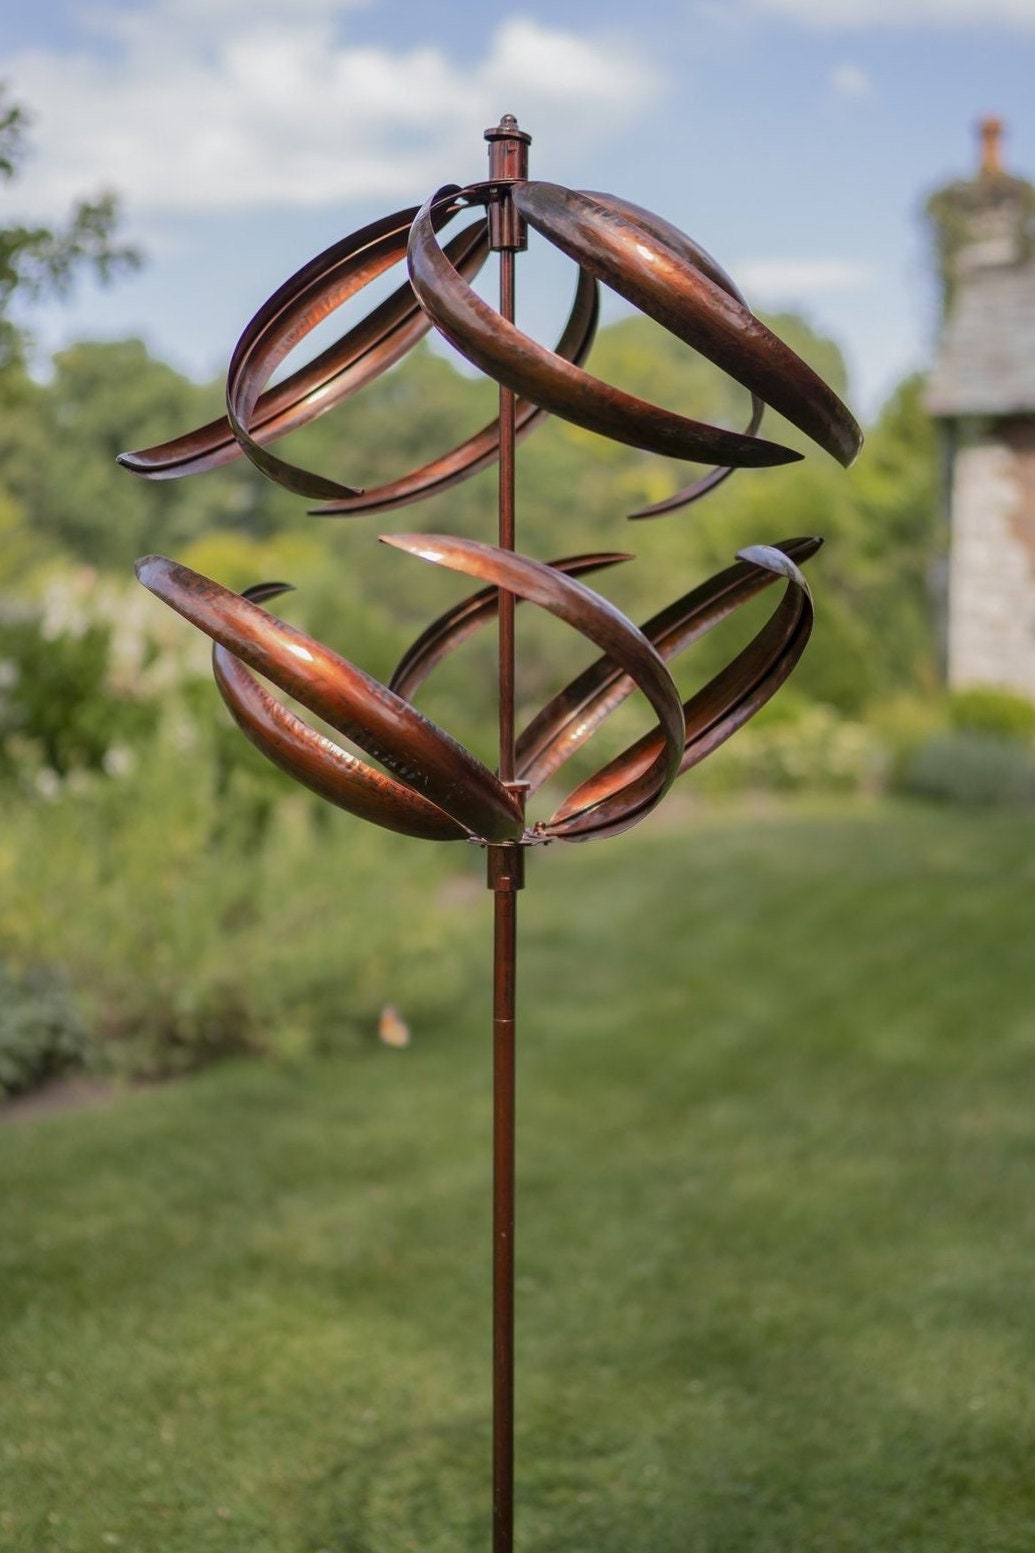  Wind Spinners, Art Decor Brown Abstract Hand Drawn Coffee Cup  Hanging Wind Spinners for Yard and Garden 3D Stainless Steel Metal  Sculptures Crafts Ornaments 8 Inch : Patio, Lawn & Garden